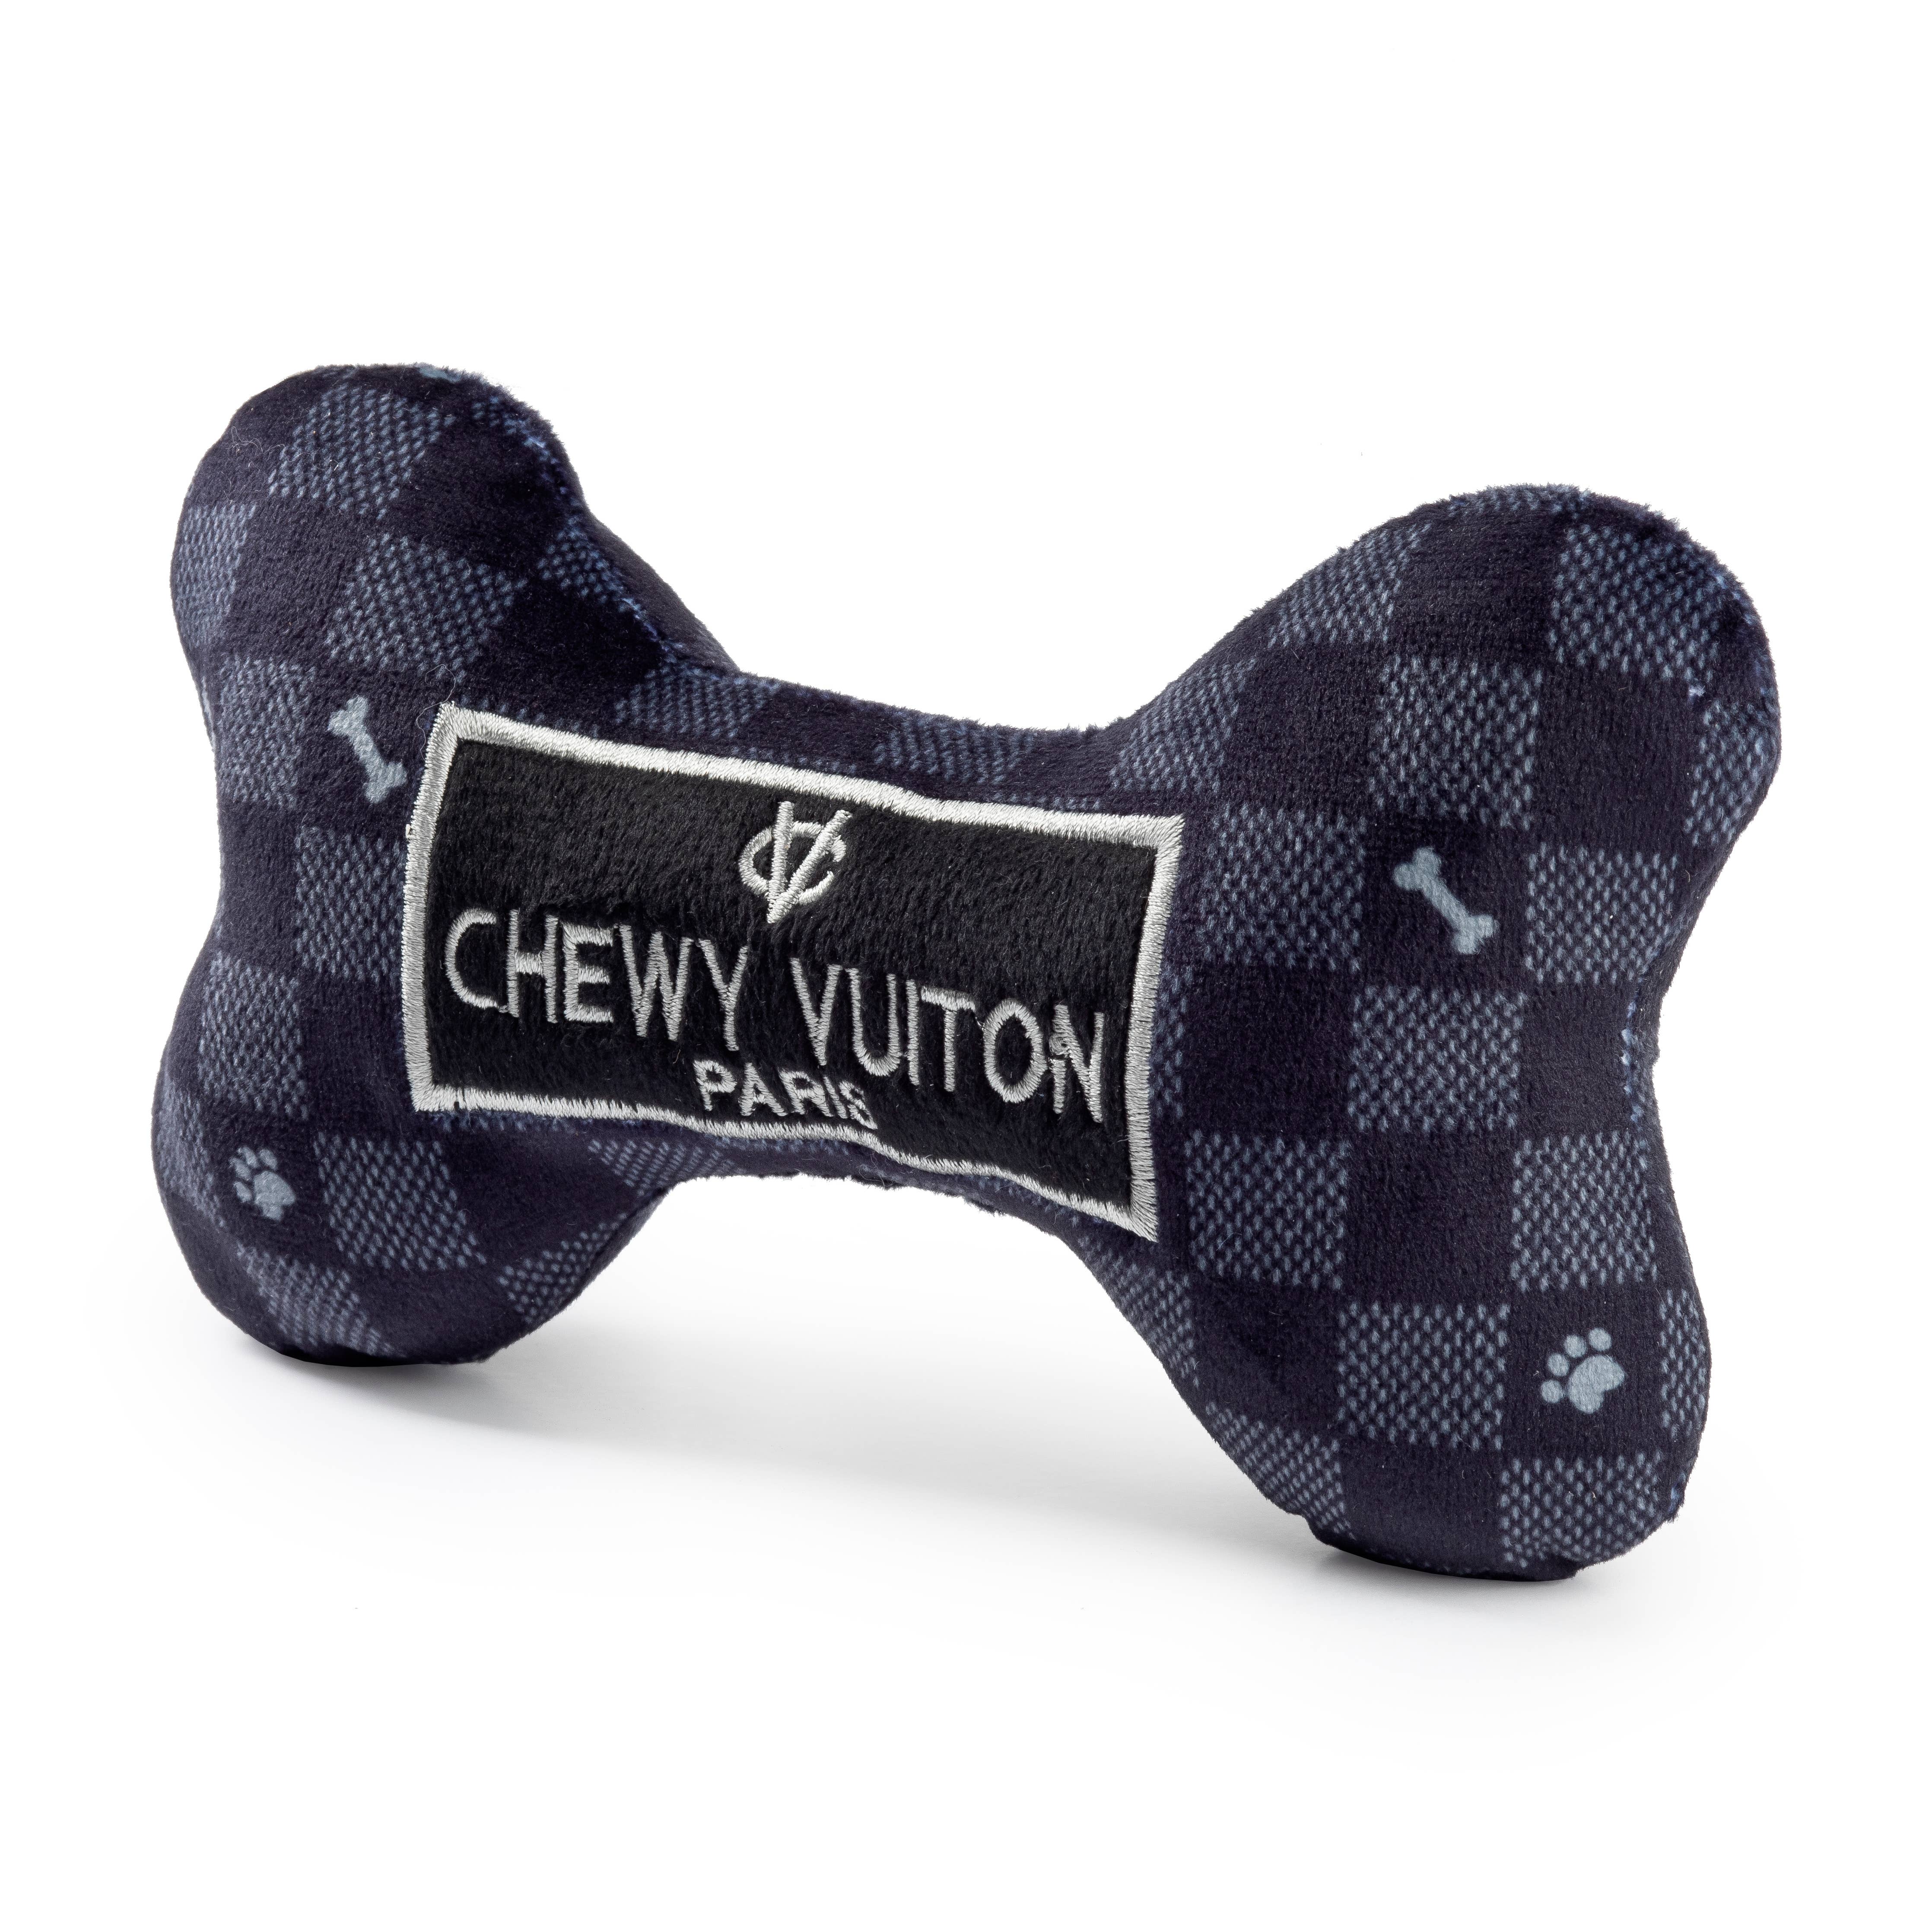 Black Checker Chewy Vuiton Bone Squeaker Dog Toy: Large